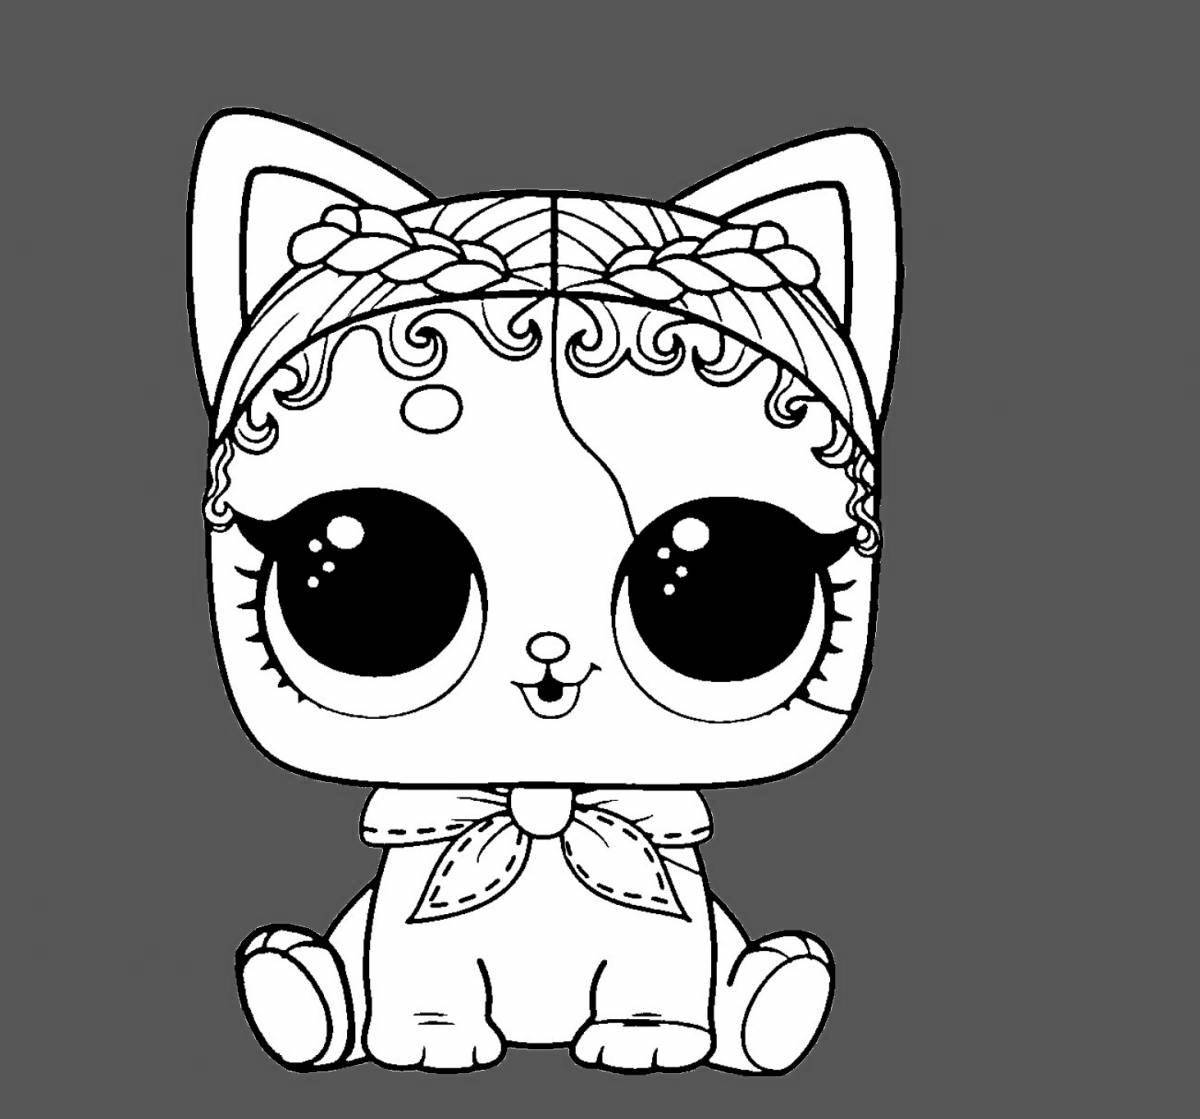 Dazzling lol pets coloring pages